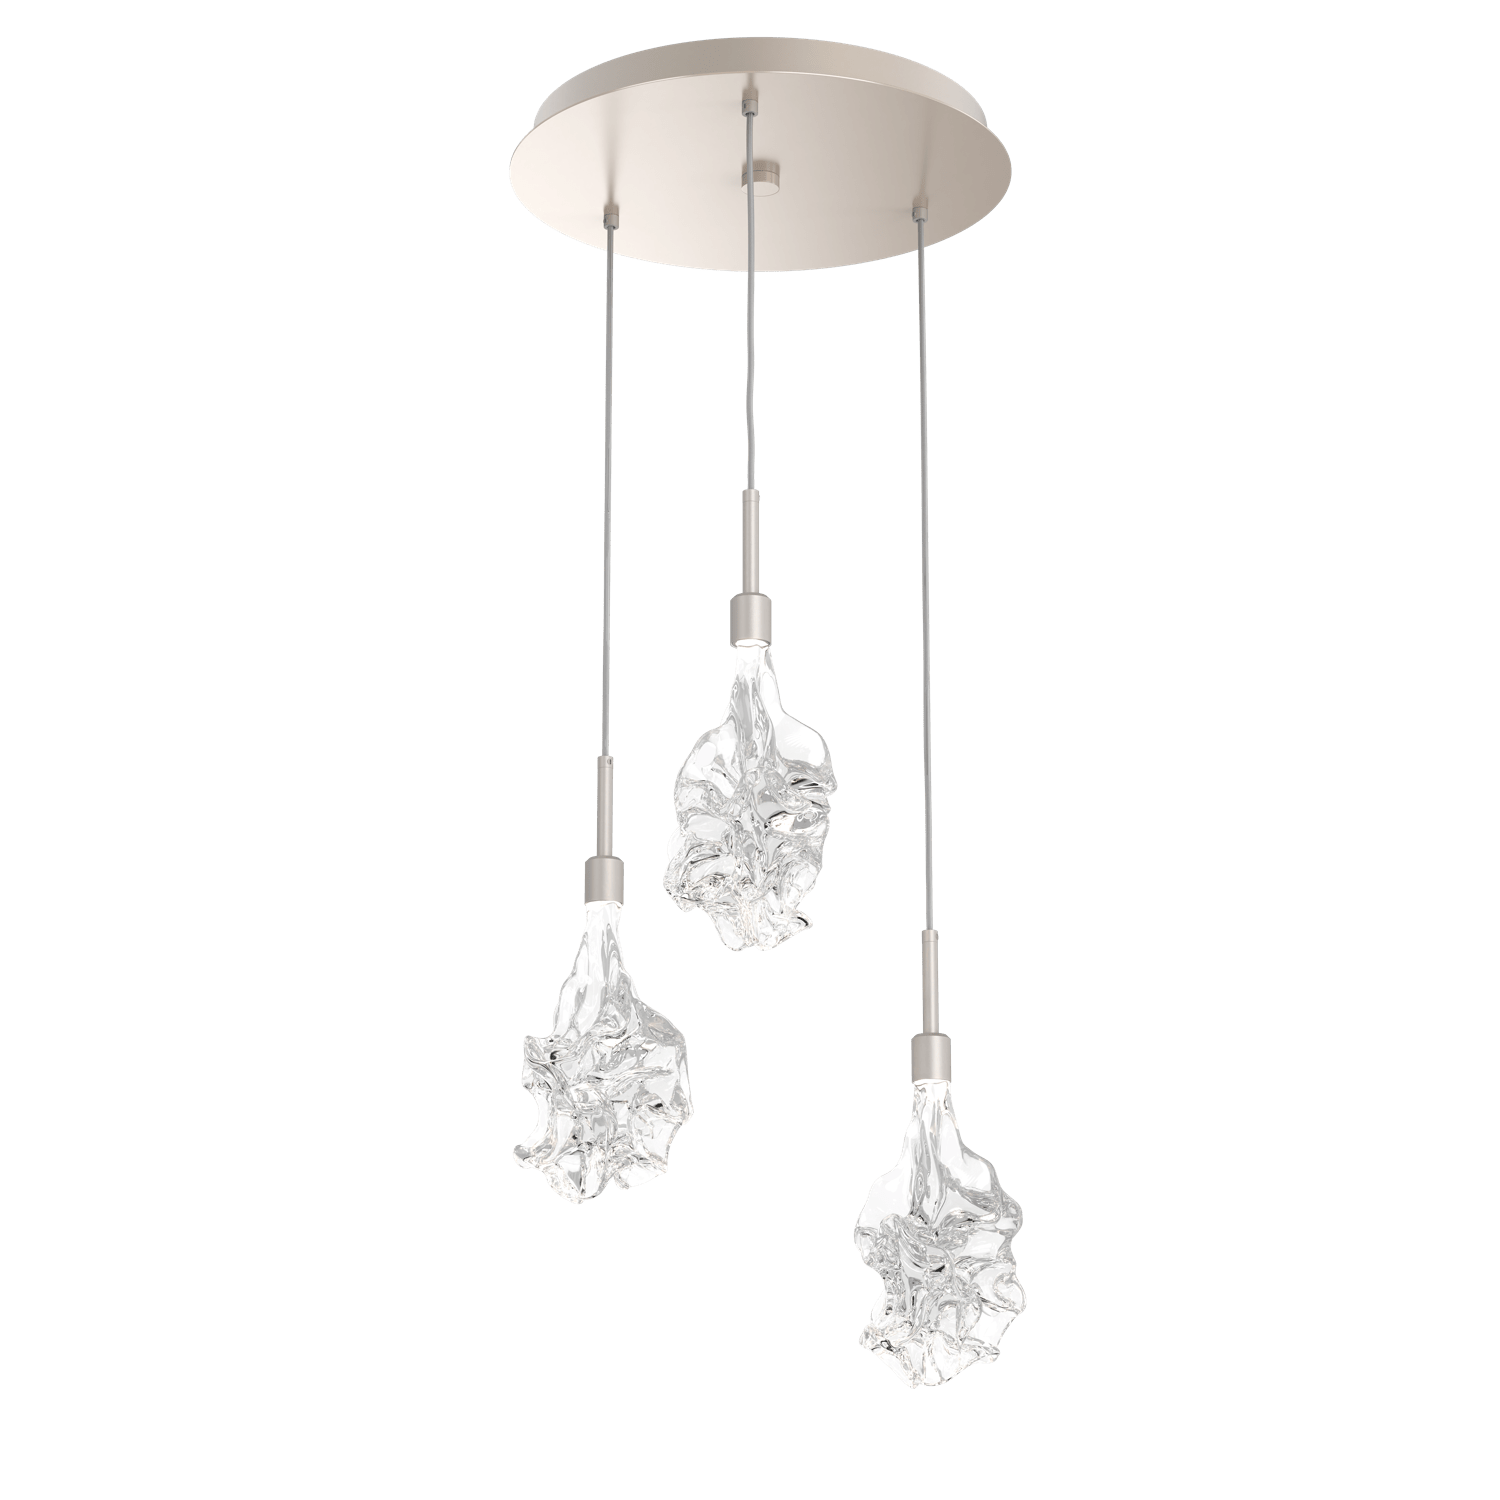 CHB0059-03-BS-Hammerton-Studio-Blossom-3-light-round-pendant-chandelier-with-metallic-beige-silver-finish-and-clear-handblown-crystal-glass-shades-and-LED-lamping